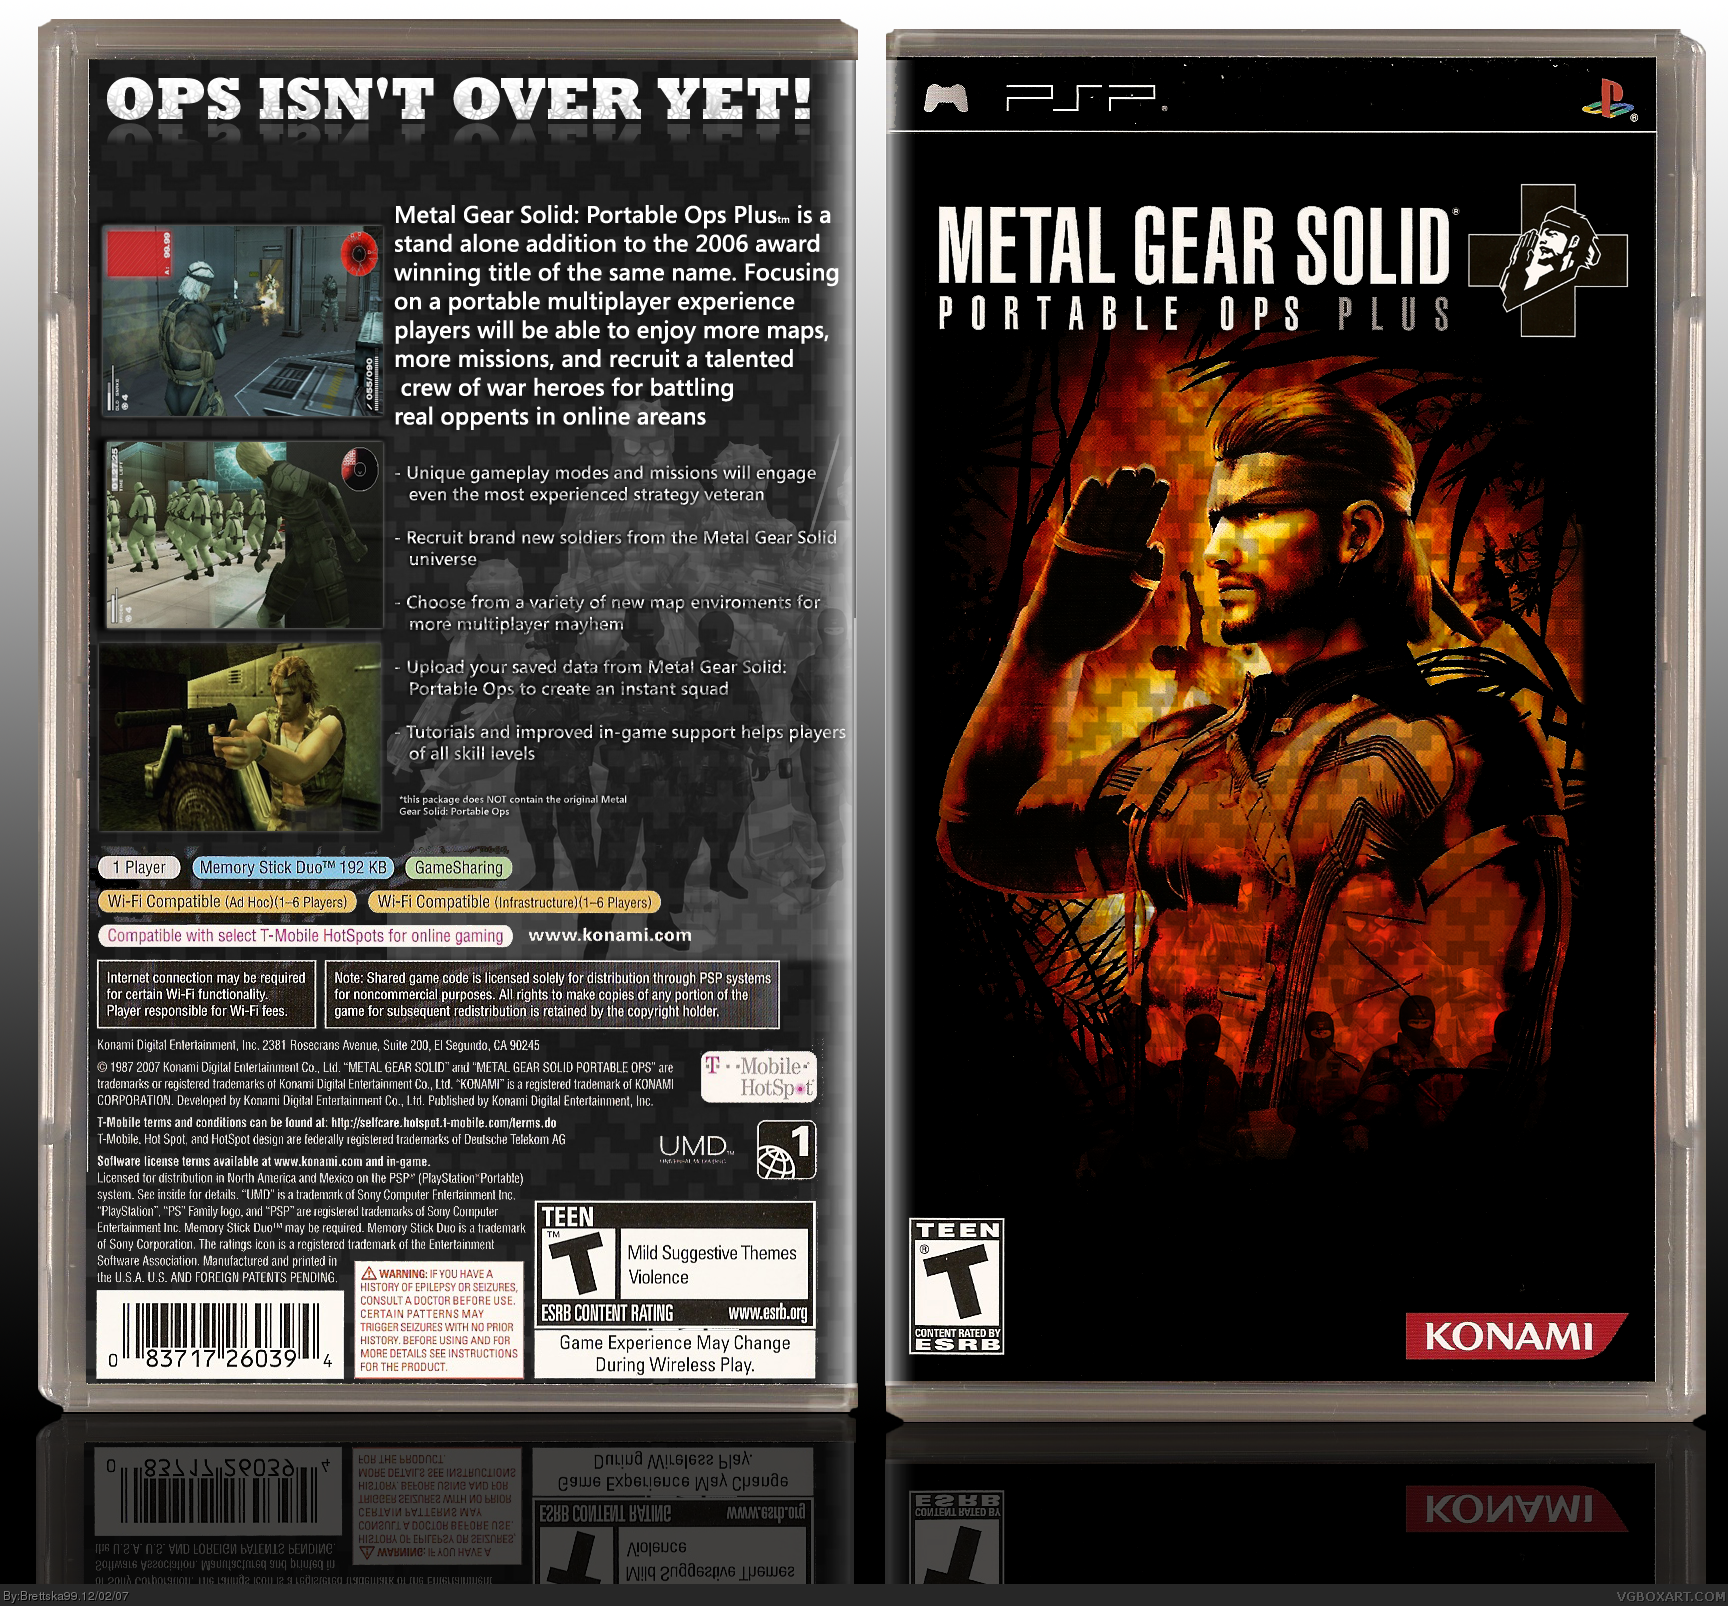 Metal Gear Solid: Portable Ops Plus box cover. 